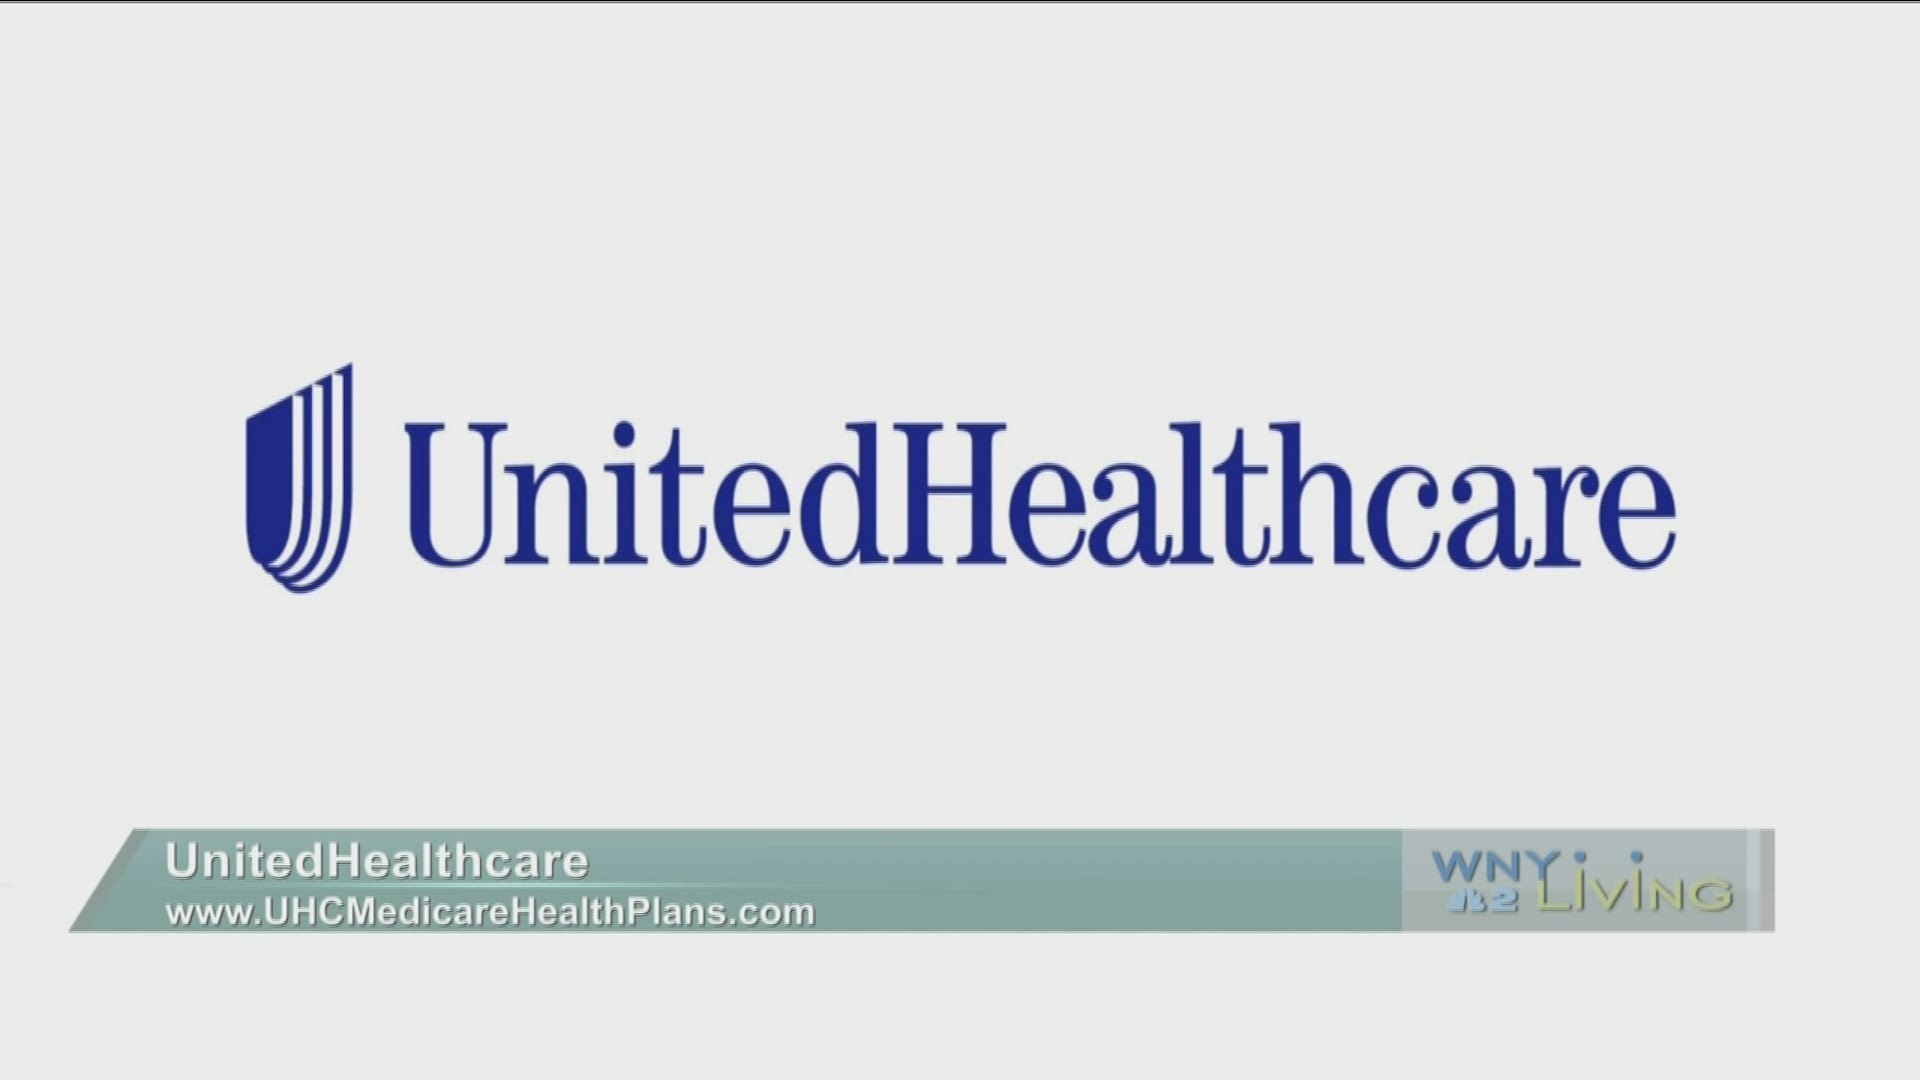 November 16 - UnitedHealthcare (THIS VIDEO IS SPONSORED BY UNITEDHEALTHCARE)